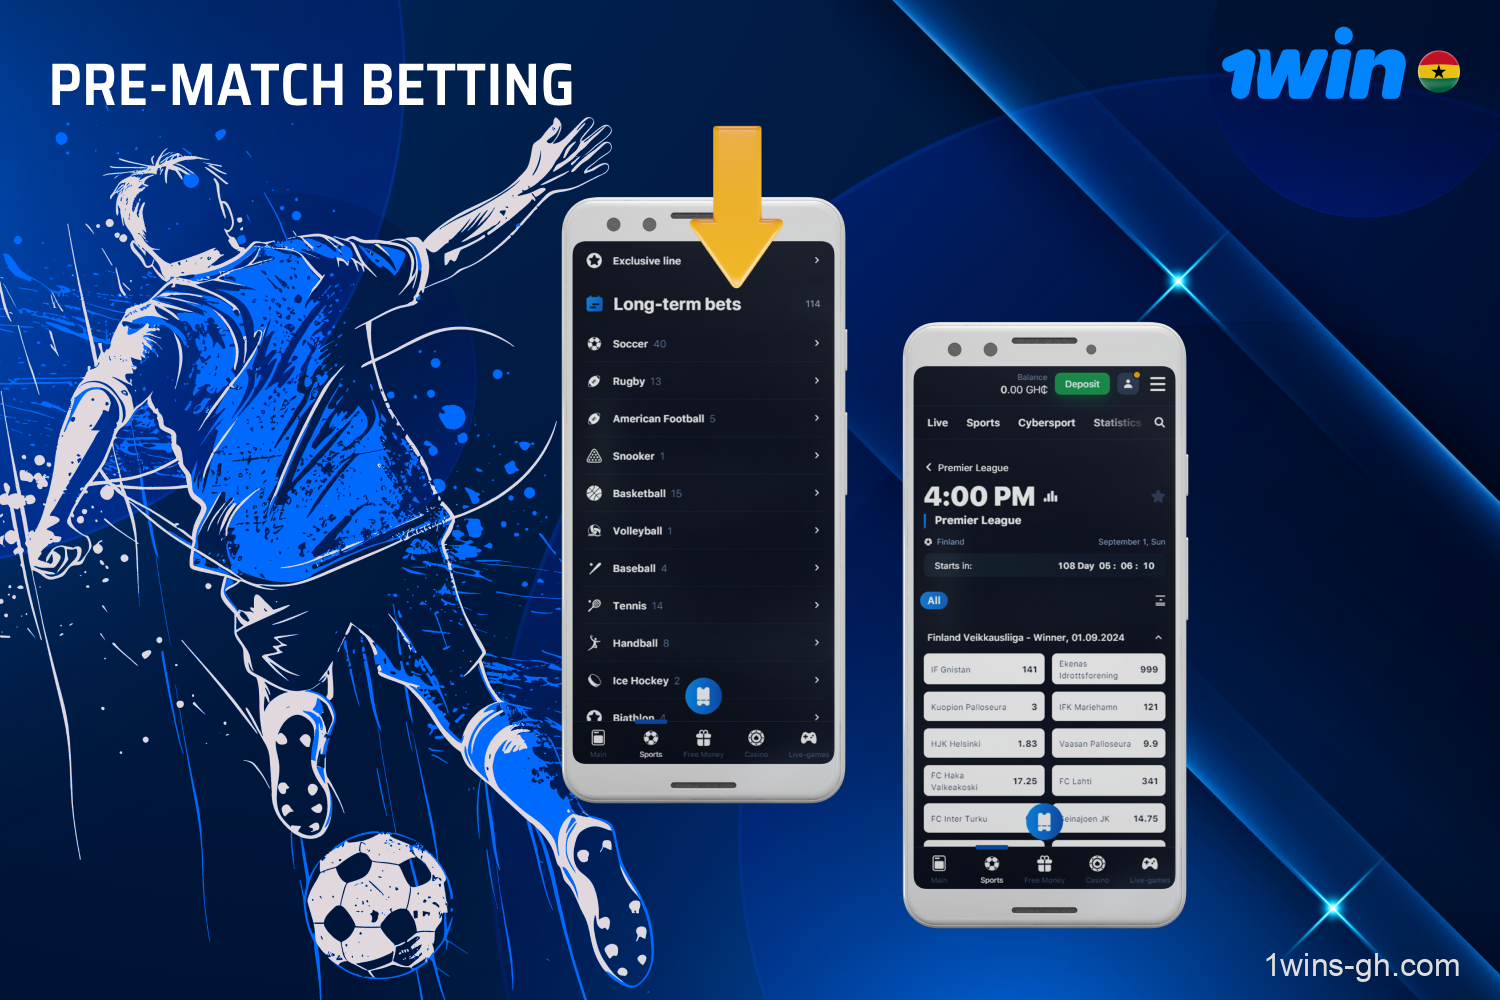 Ghanaian players can place pre-match bets on the 1win platform, allowing them to analyze the upcoming match